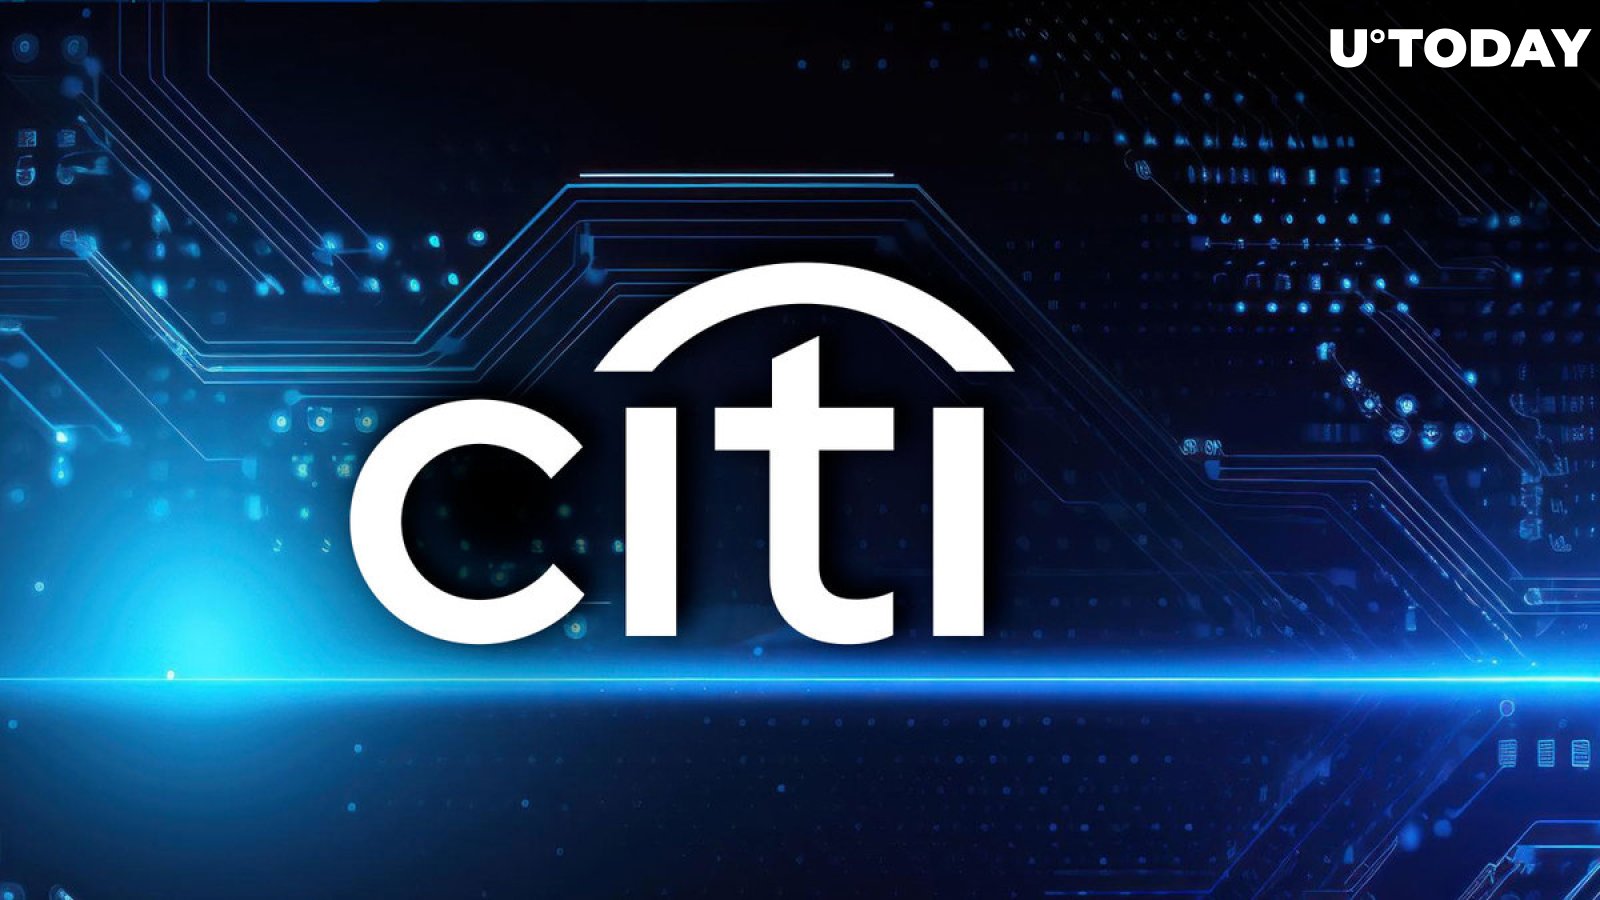 Citigroup Makes Epic Crypto Debut With Launch of Citi Token Services